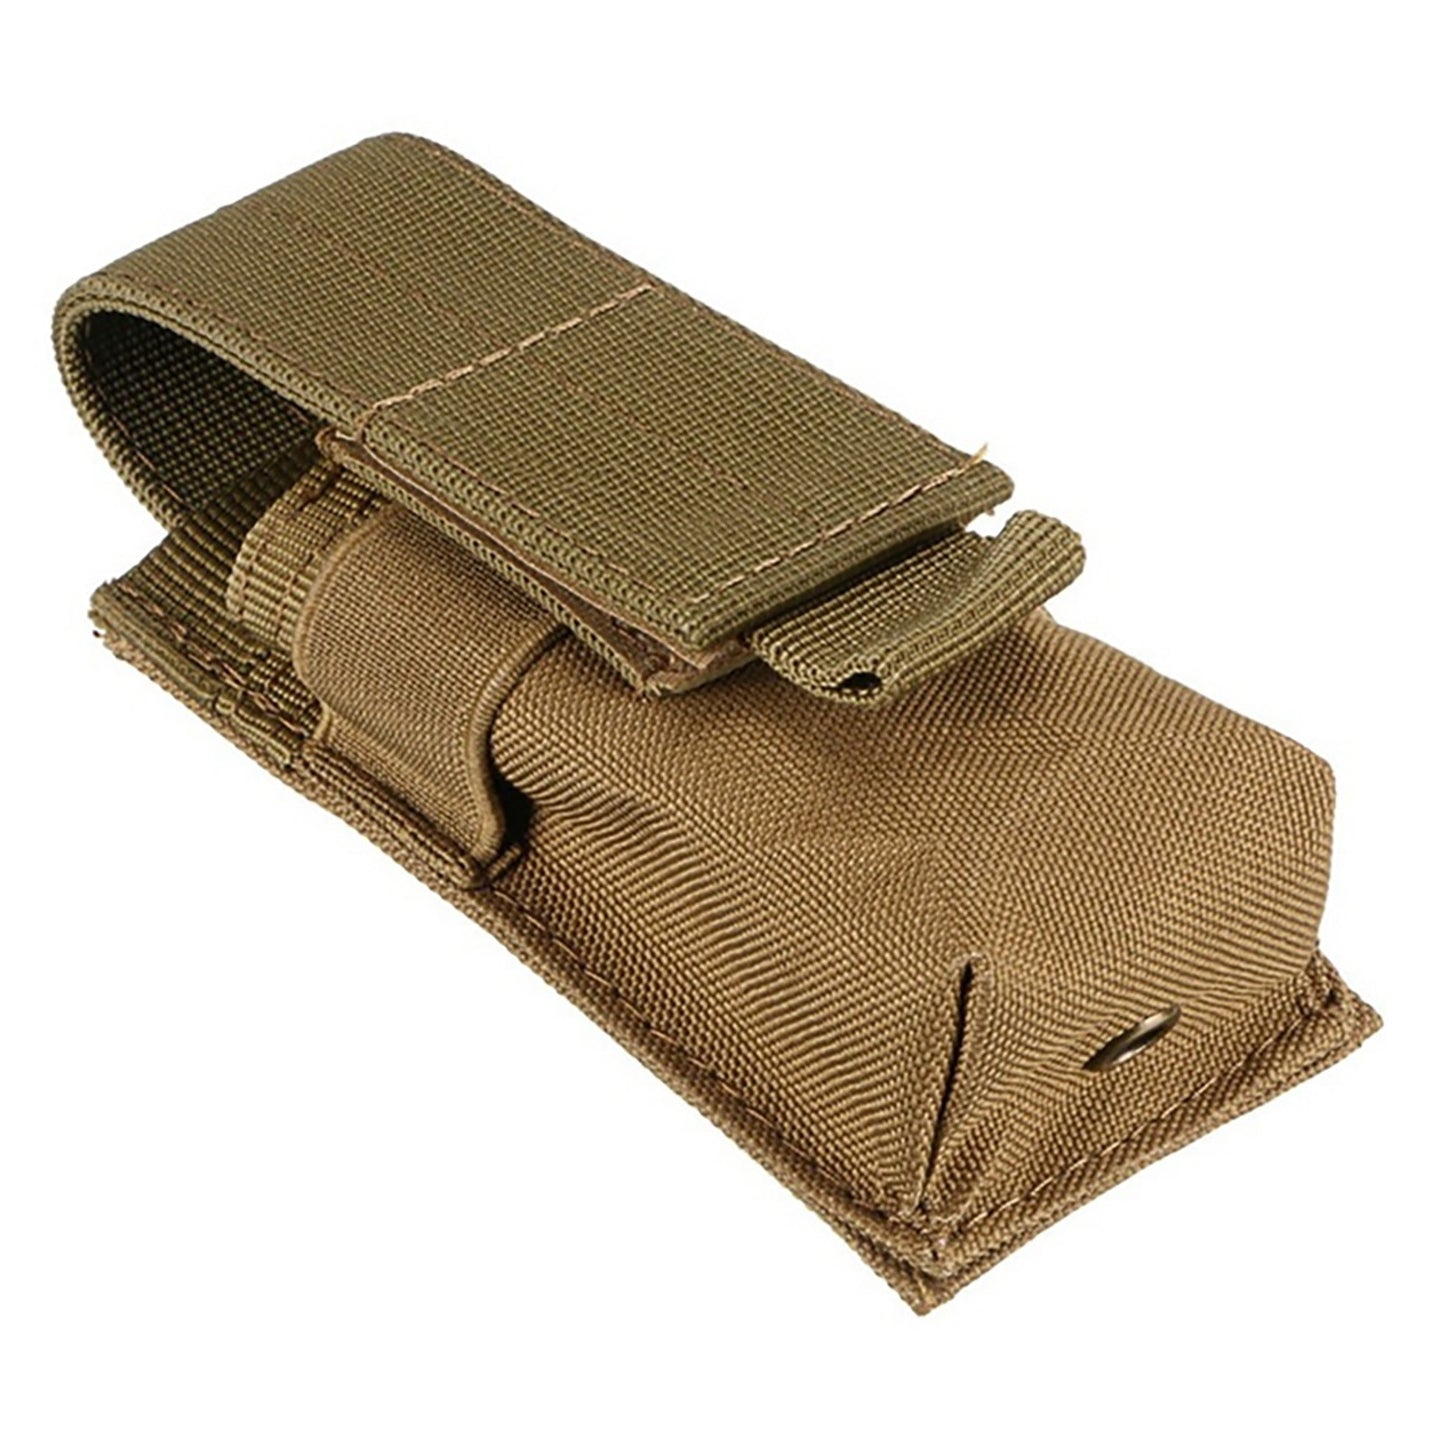 Tactical Single Mag / Flashlight pouch